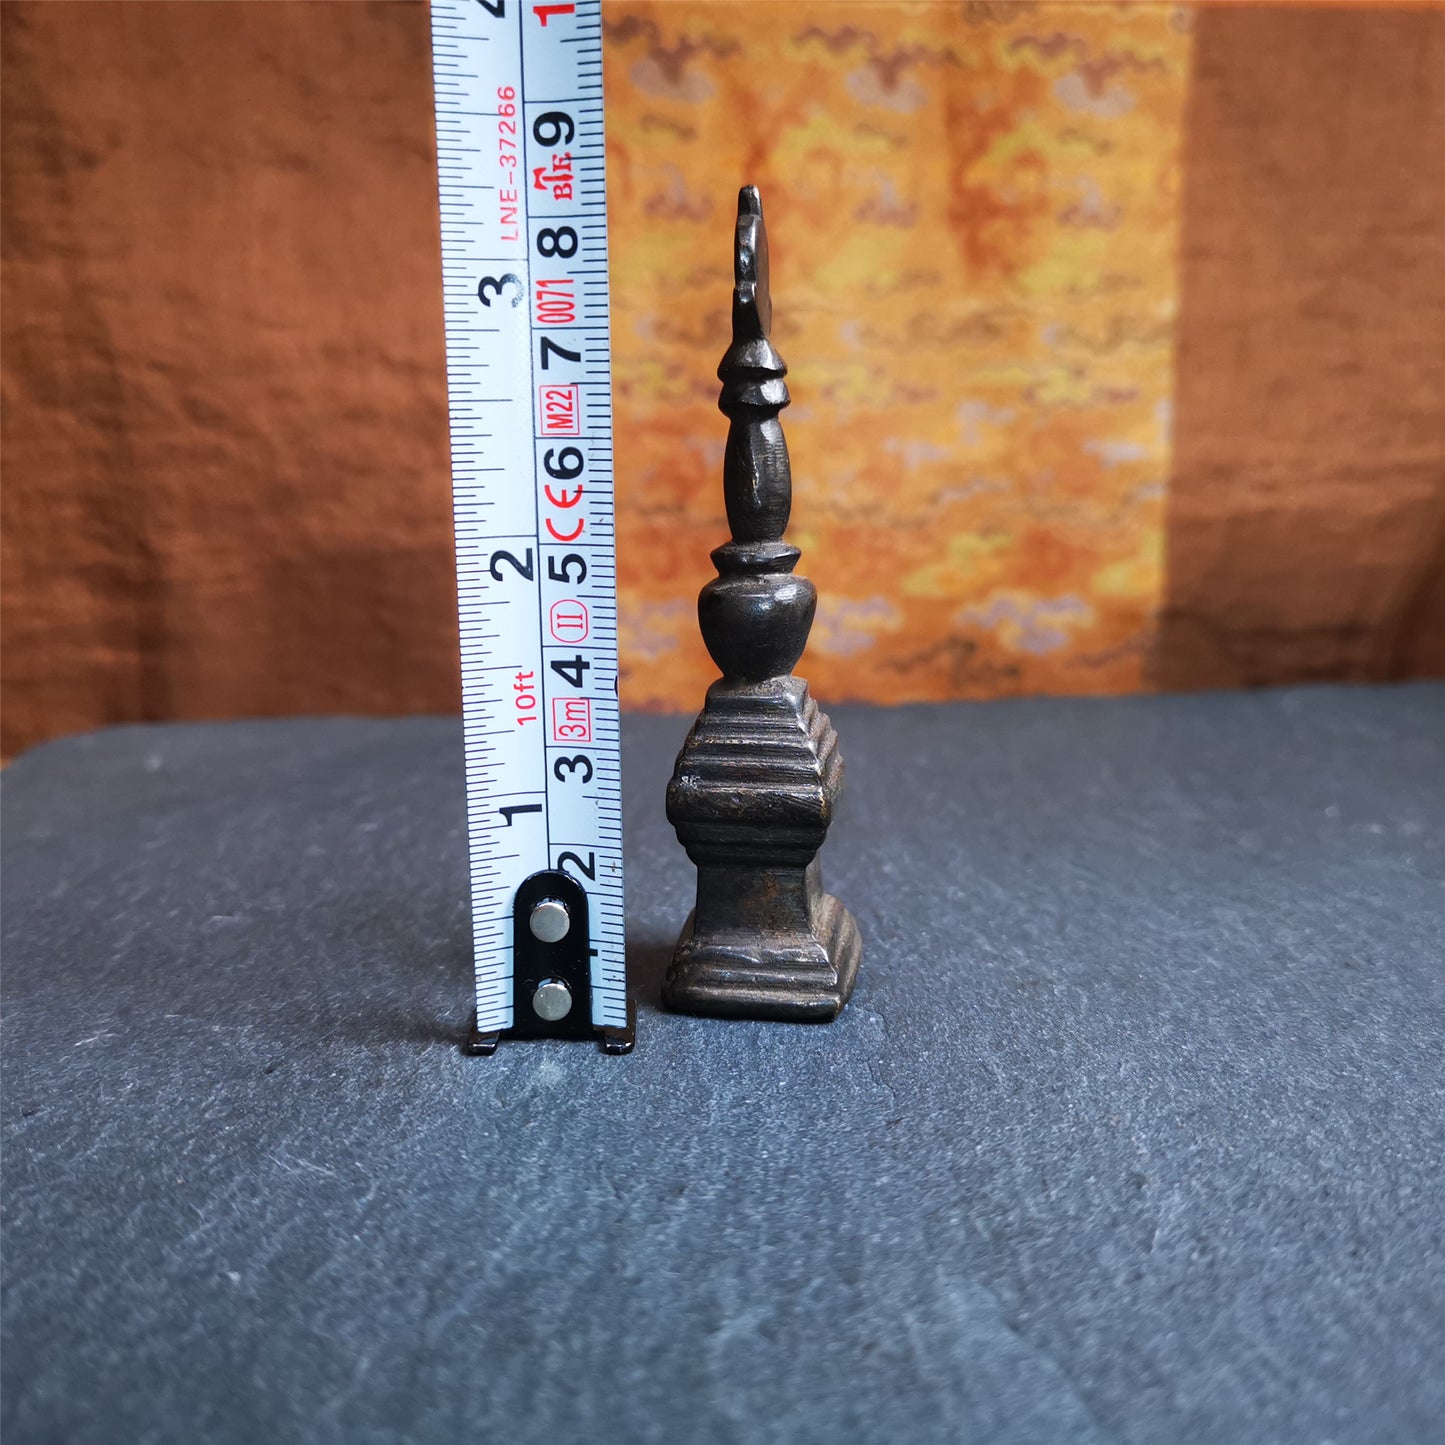 This old stupa was collected from Derge Park Hang Tibet,about 60 years old.Blessed by lama. It was made of thokcha,black color,3.35 inches height,0.79 inch width. You can put it in your shrine or altar. A stupa is used as a place of meditation.A related architectural term is a chaitya , which is a prayer hall or temple containing a stupa.